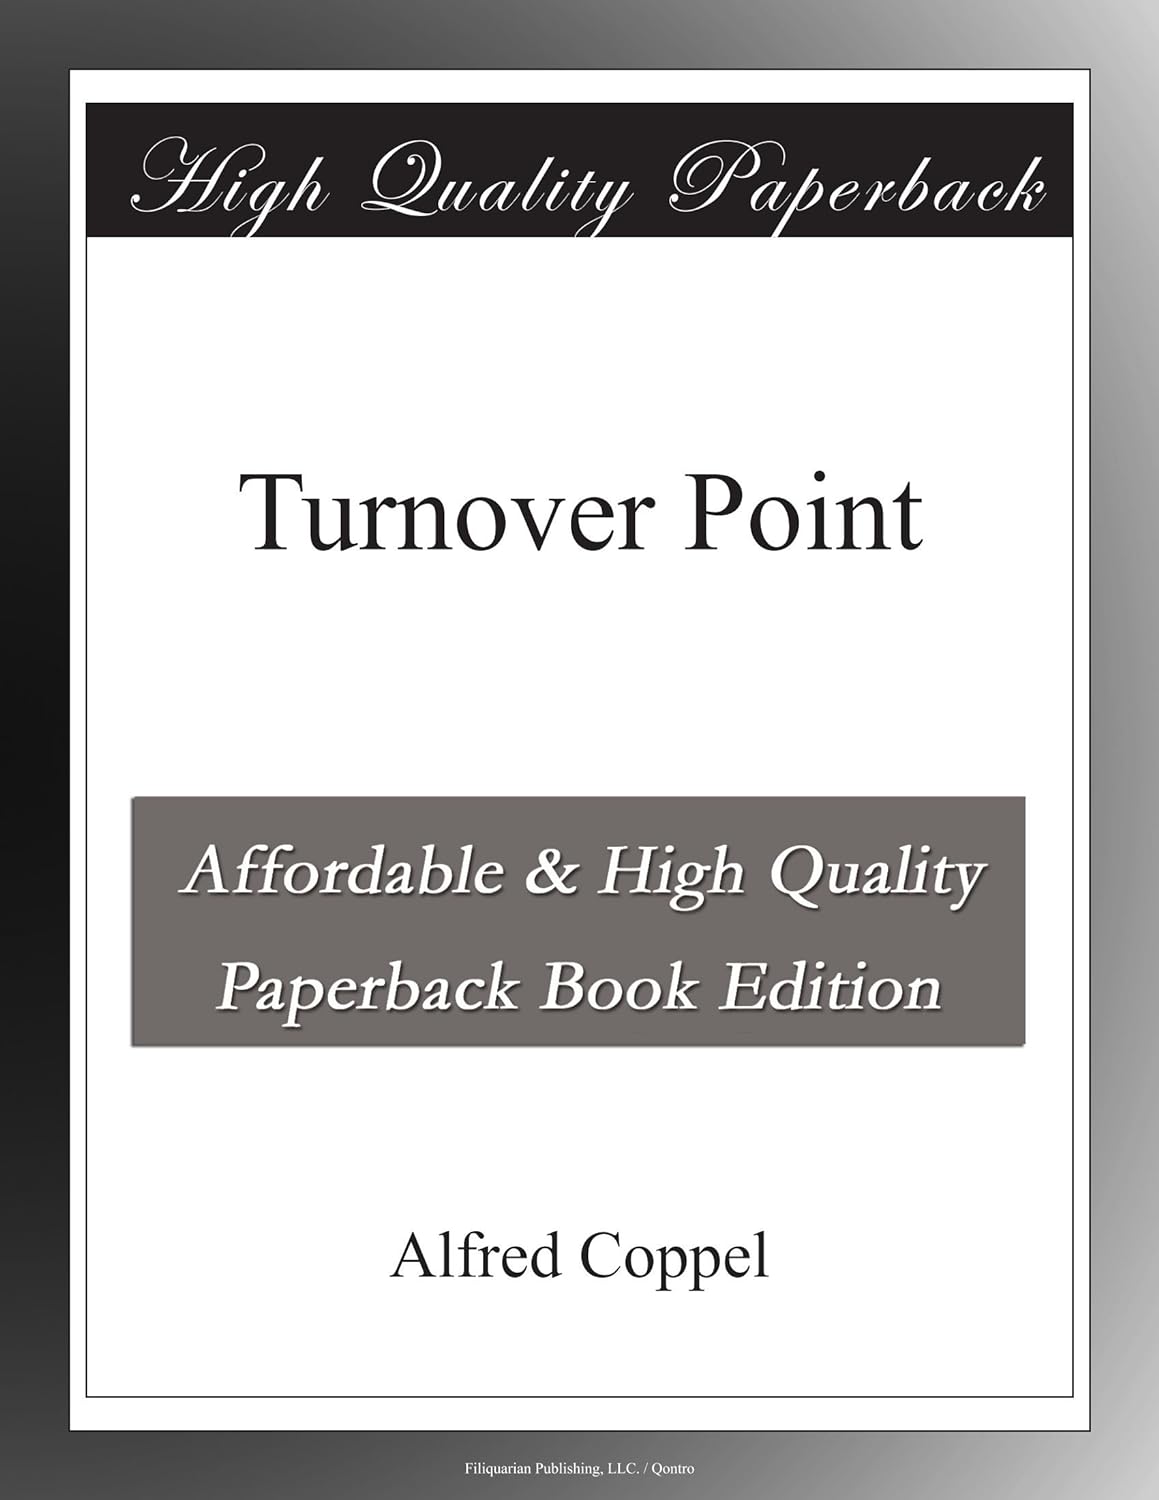 Turnover Point - Alfred Coppel